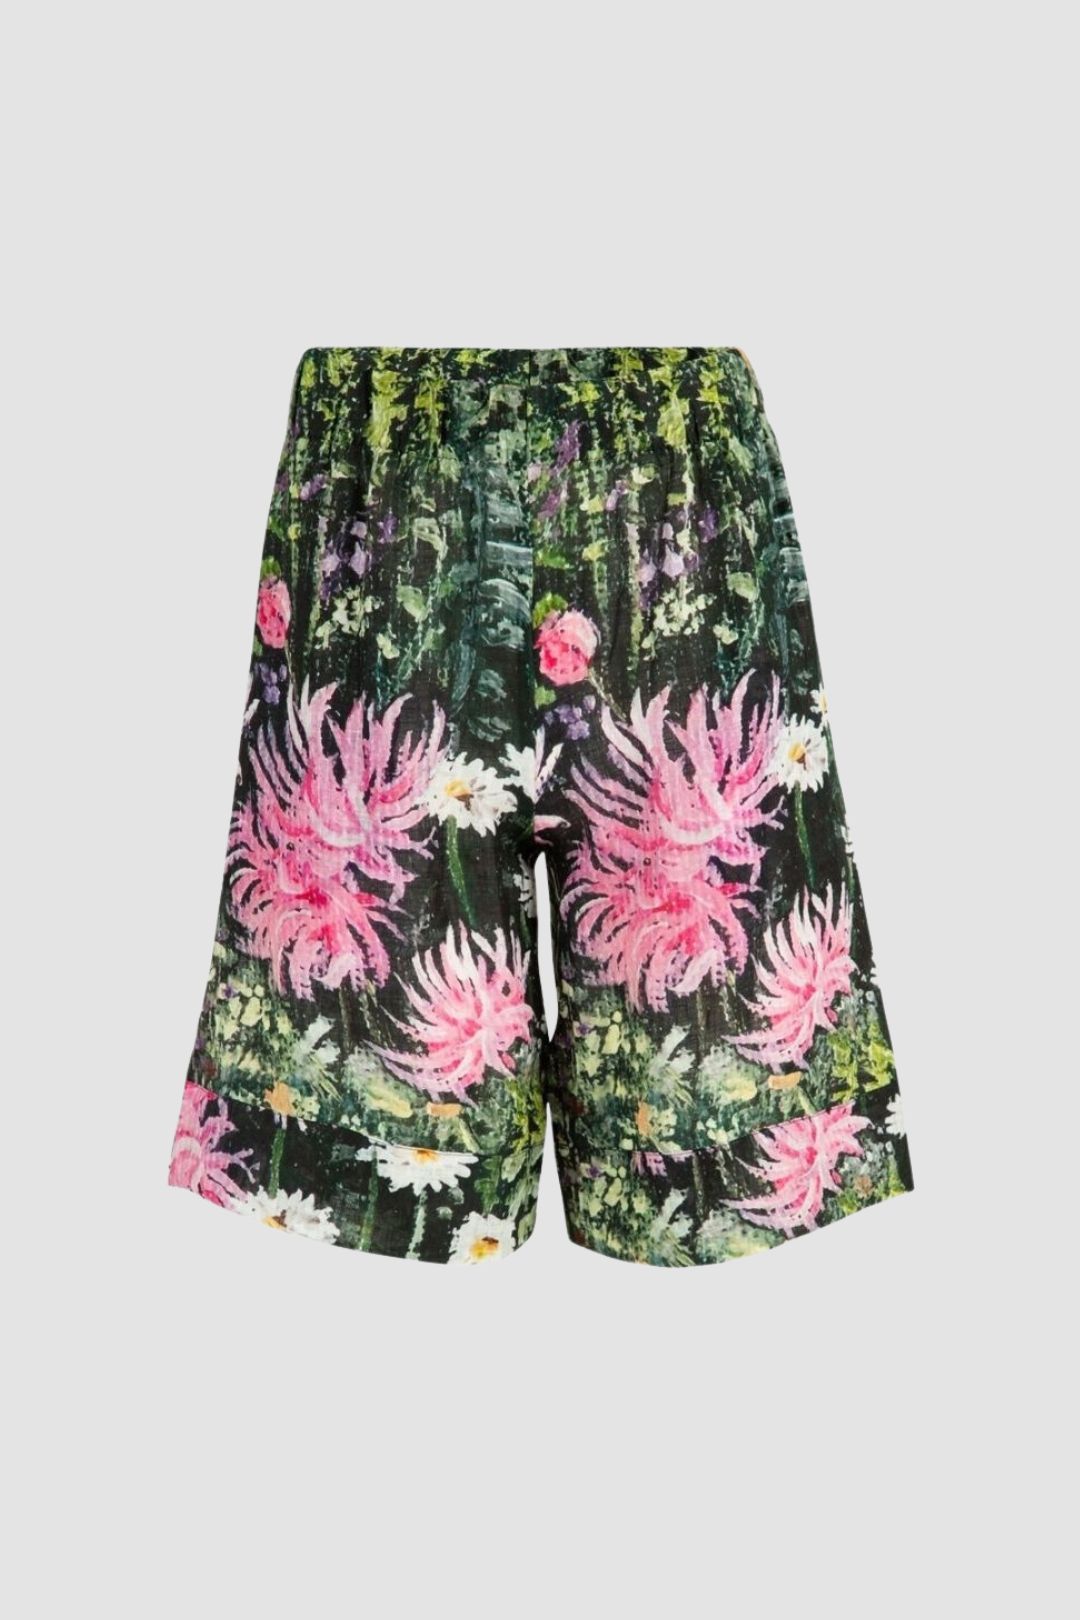 Let’s Get Shorty Shorts in Floral Print